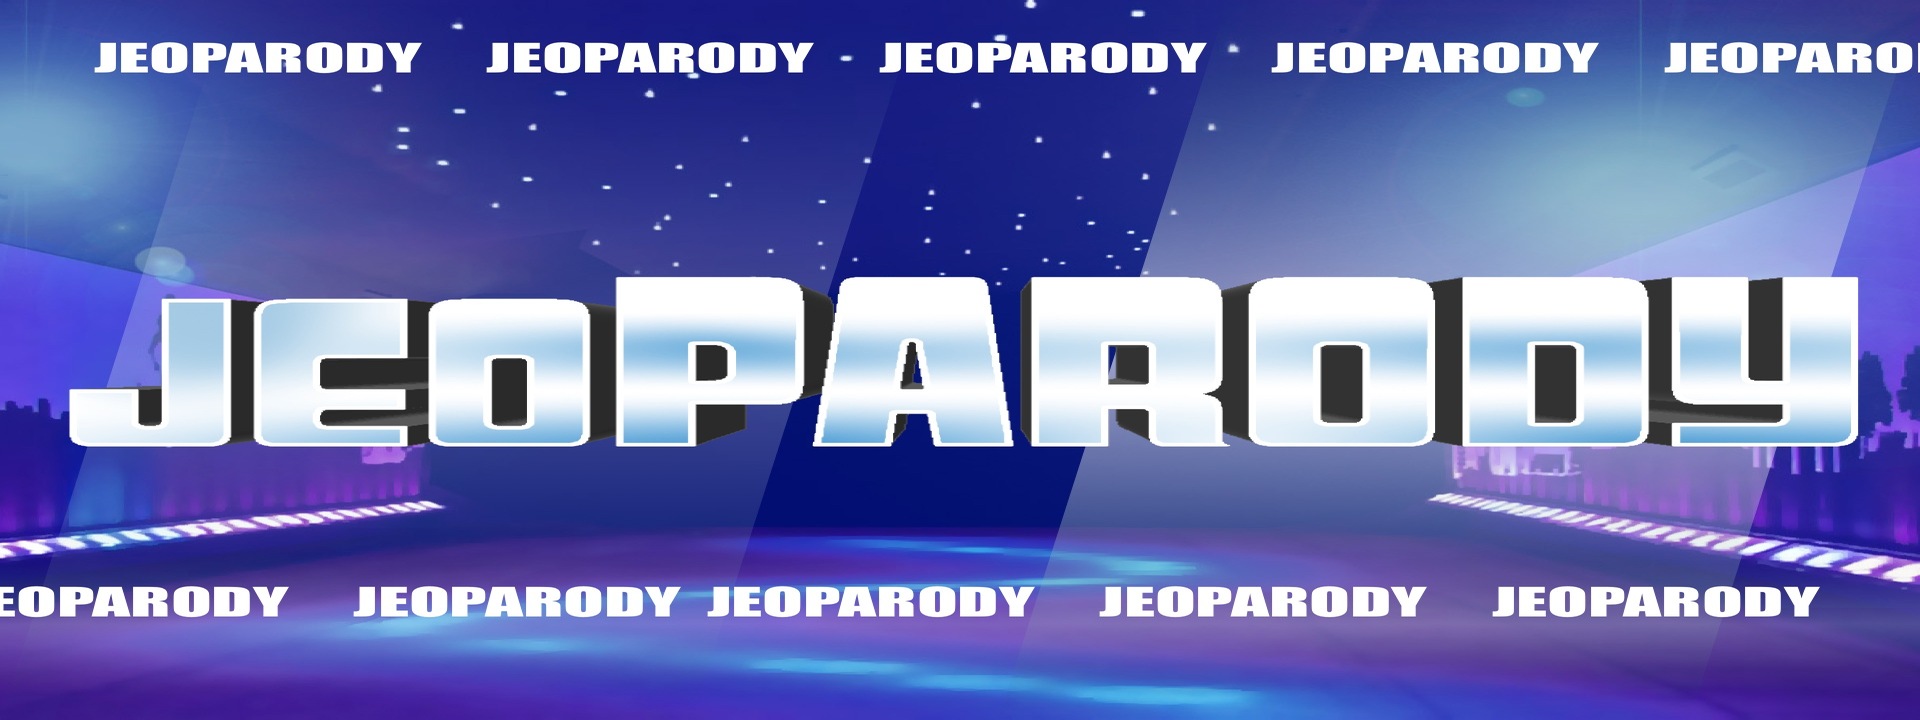 Creating And Formatting Text With Master Jeopardy Font In Powerpoint